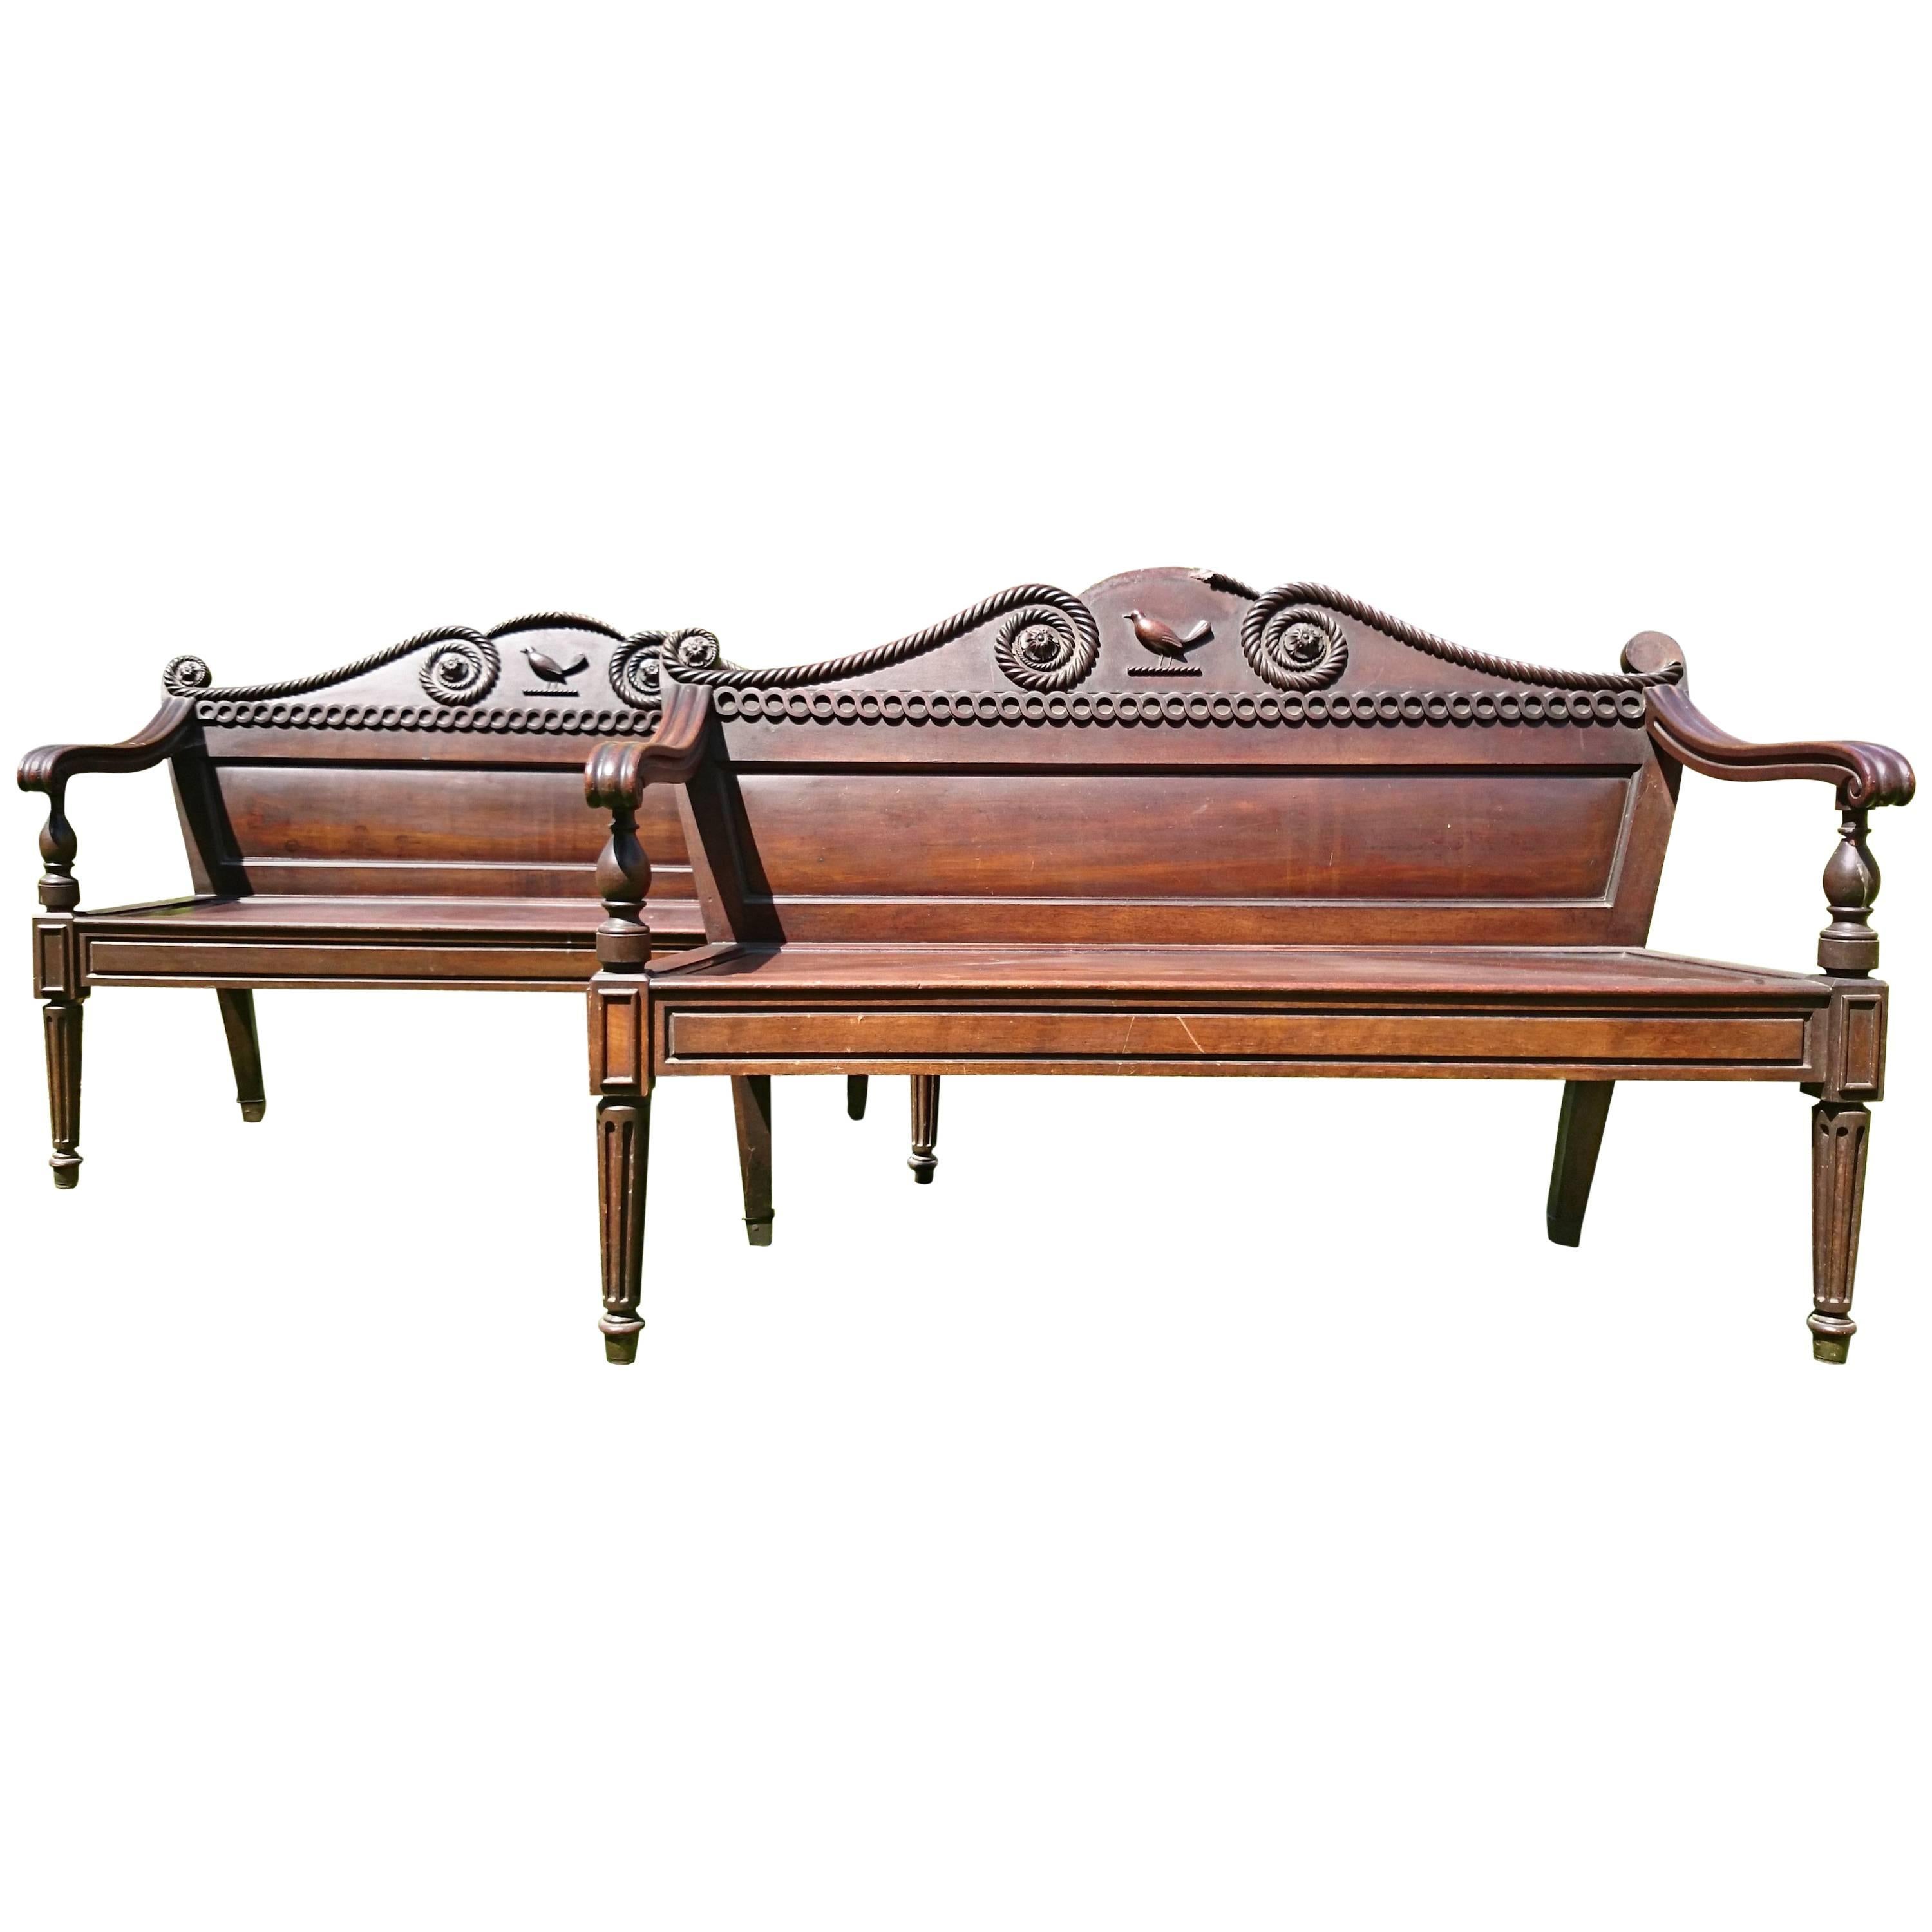 Rochfort Benches, Pair Irish Regency Mahogany Benches Original Family Owner For Sale